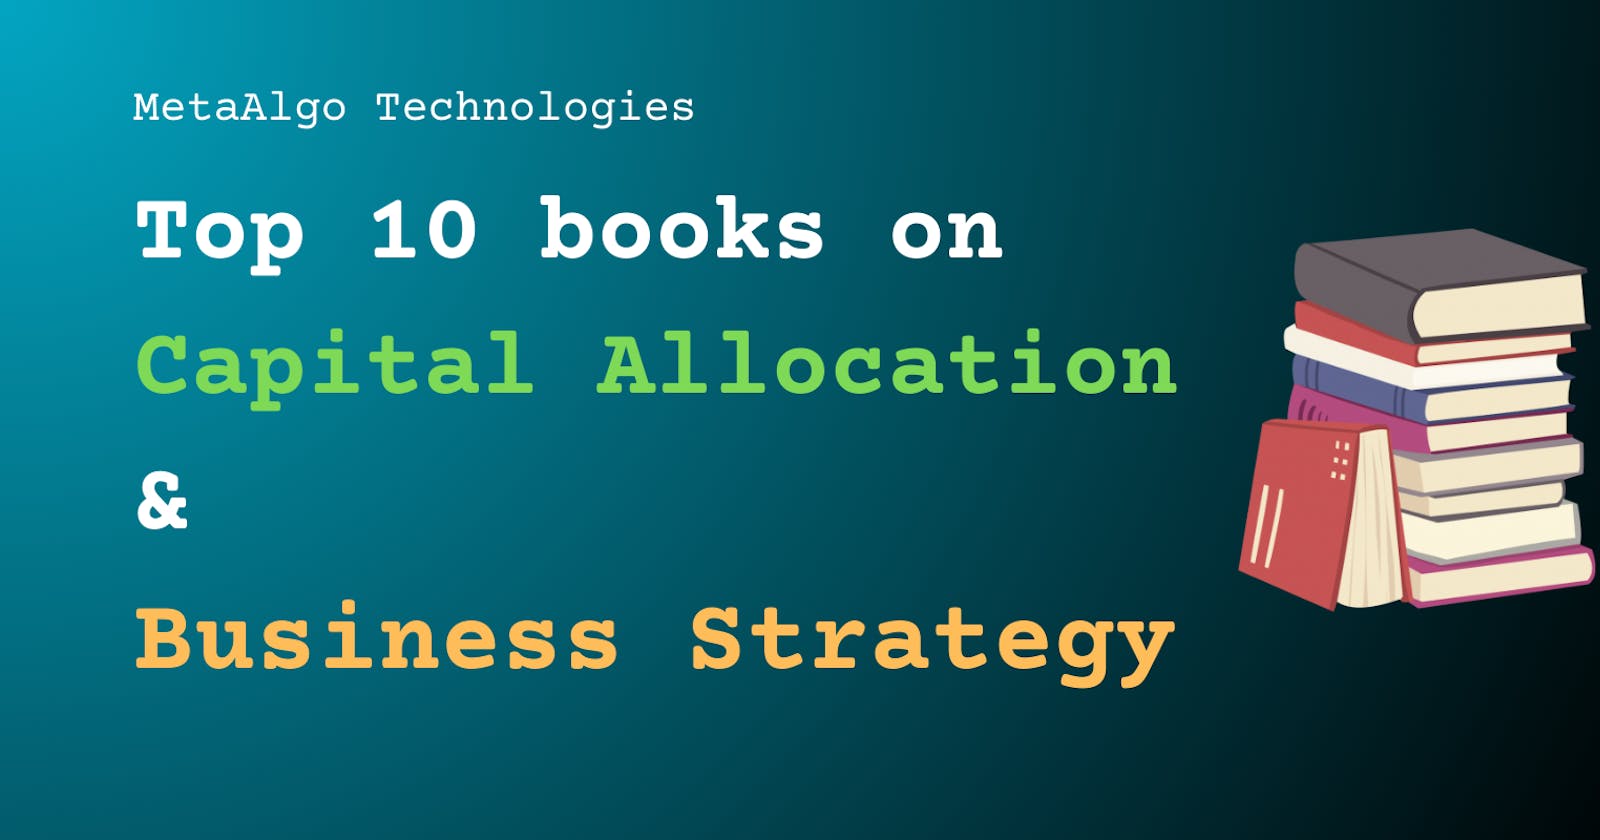 Top 10 books on Capital Allocation & Business Strategy